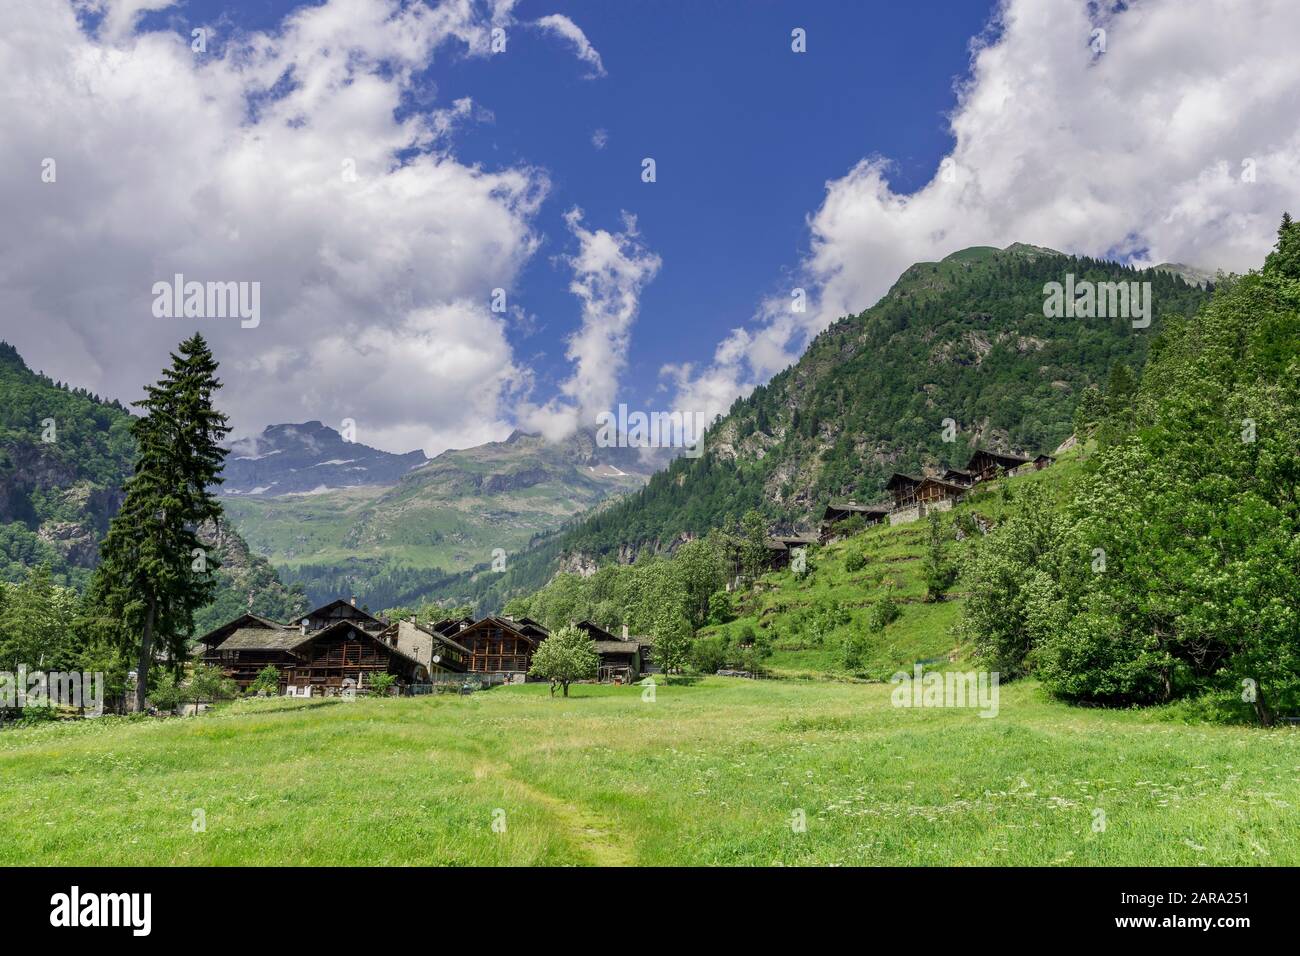 Old Walser houses in Pedemonte, Alagna Valsesia, Province of Vercelli, Piedmont, Italy Stock Photo